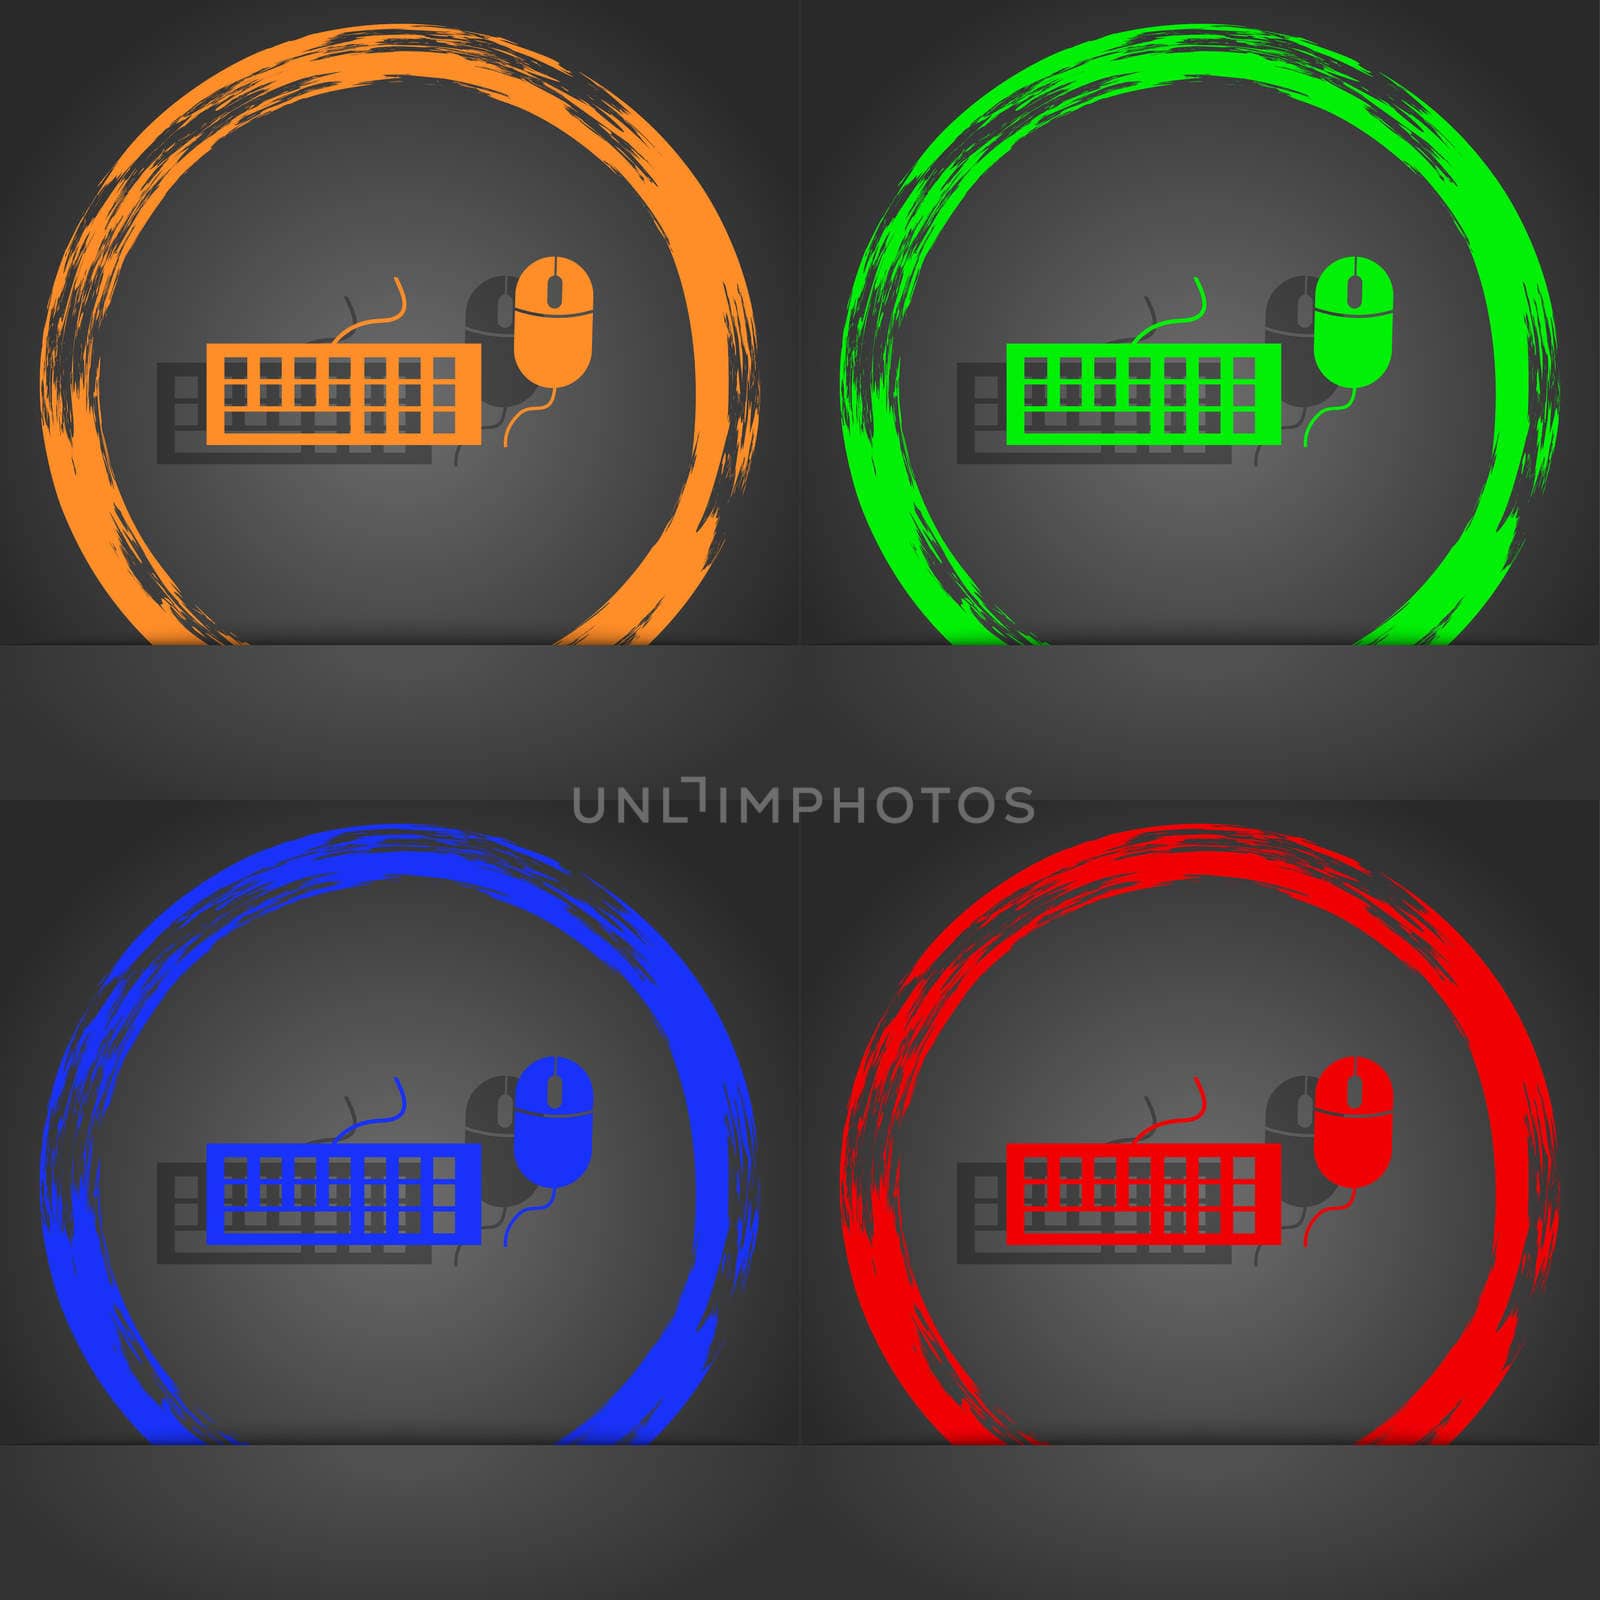 Computer keyboard and mouse Icon. Fashionable modern style. In the orange, green, blue, red design. illustration